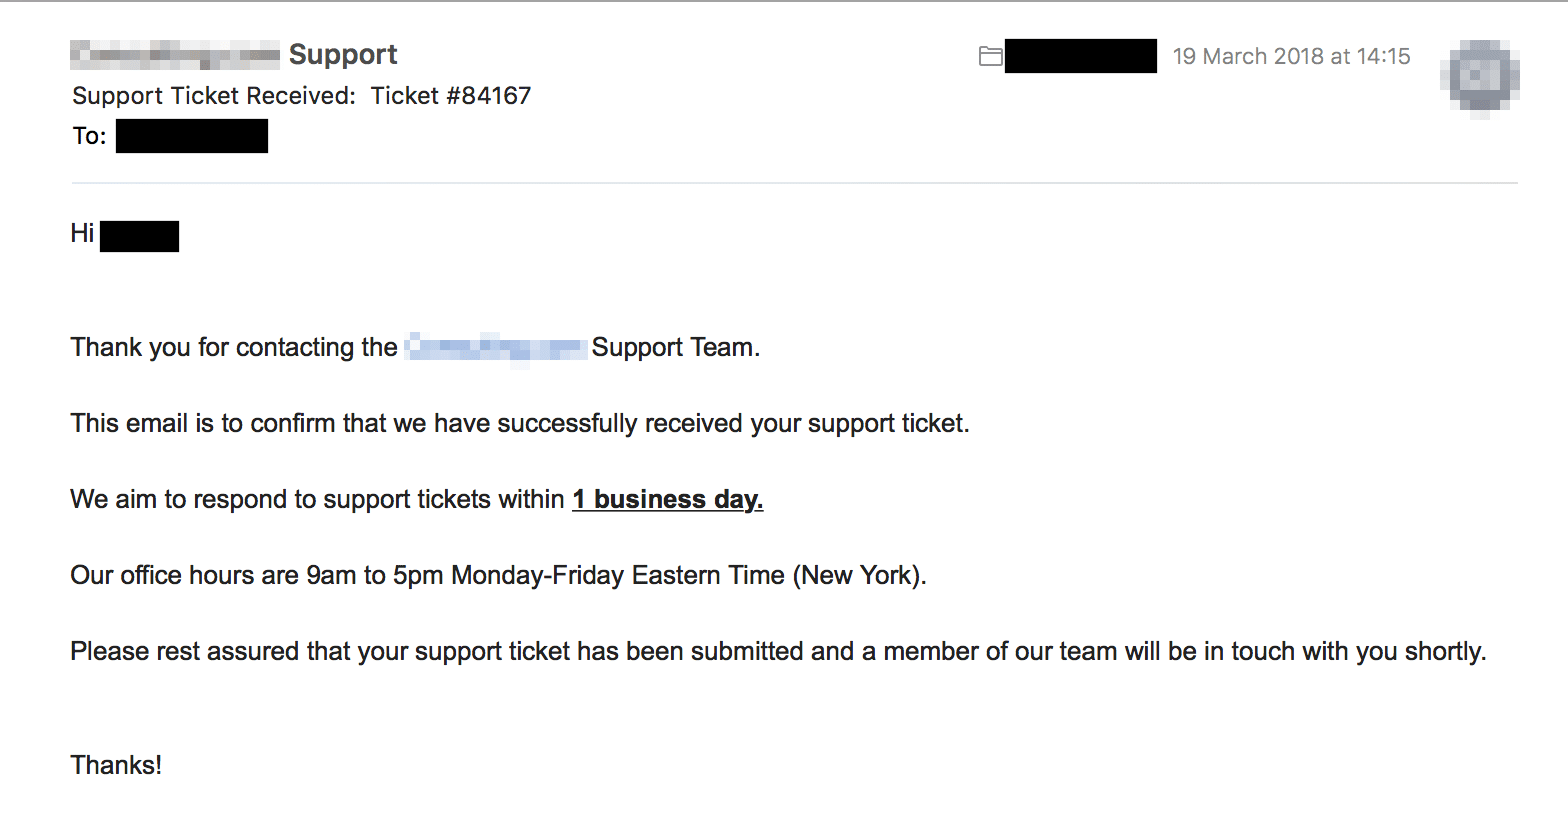 Support email